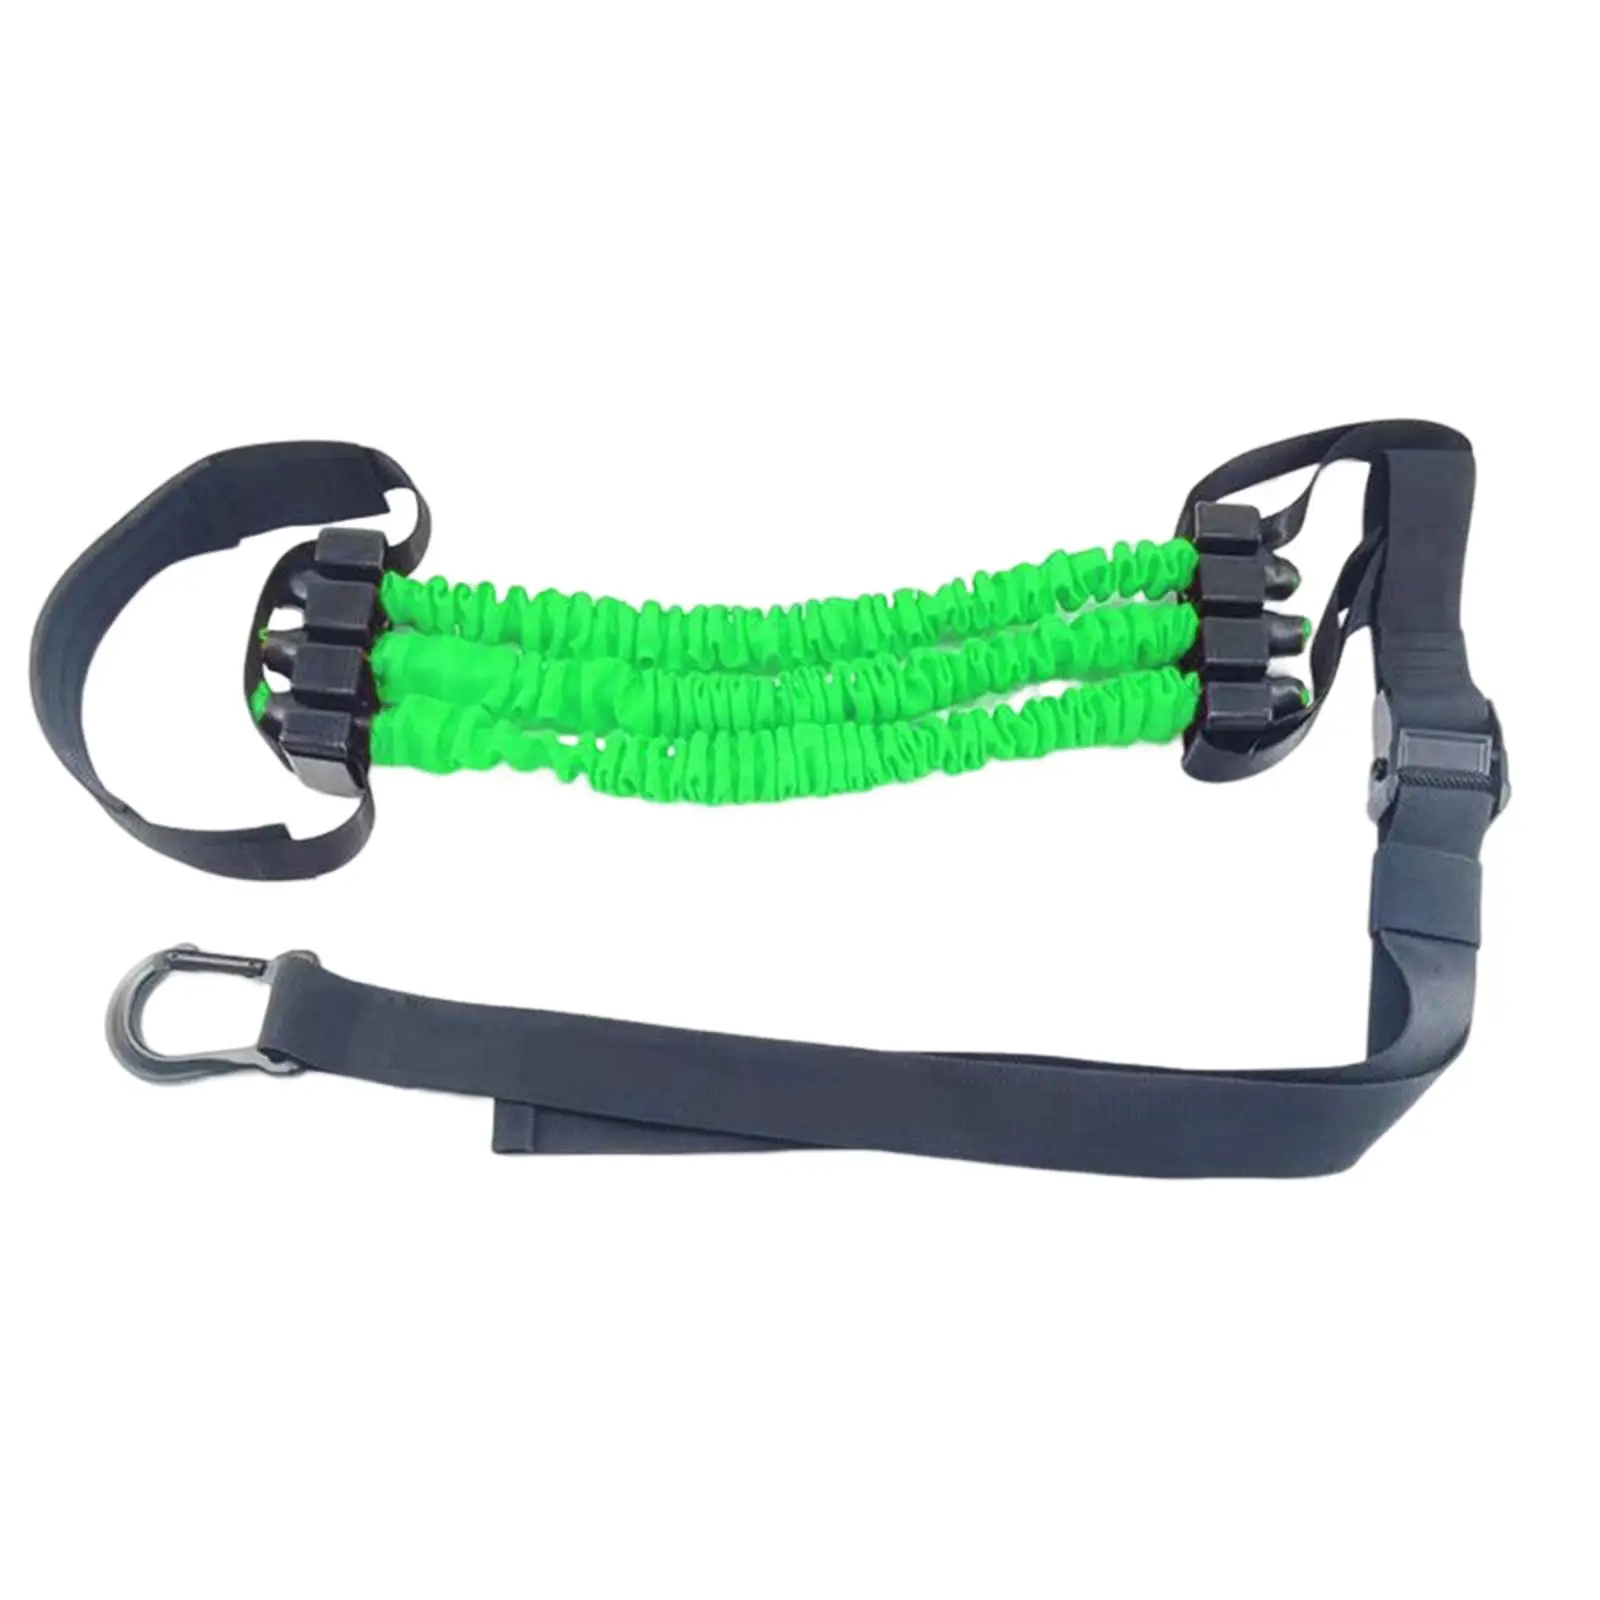 Premium Chin up Assist Bands Resistance Bands Improve Shoulder Strength for Weight Lifting Training